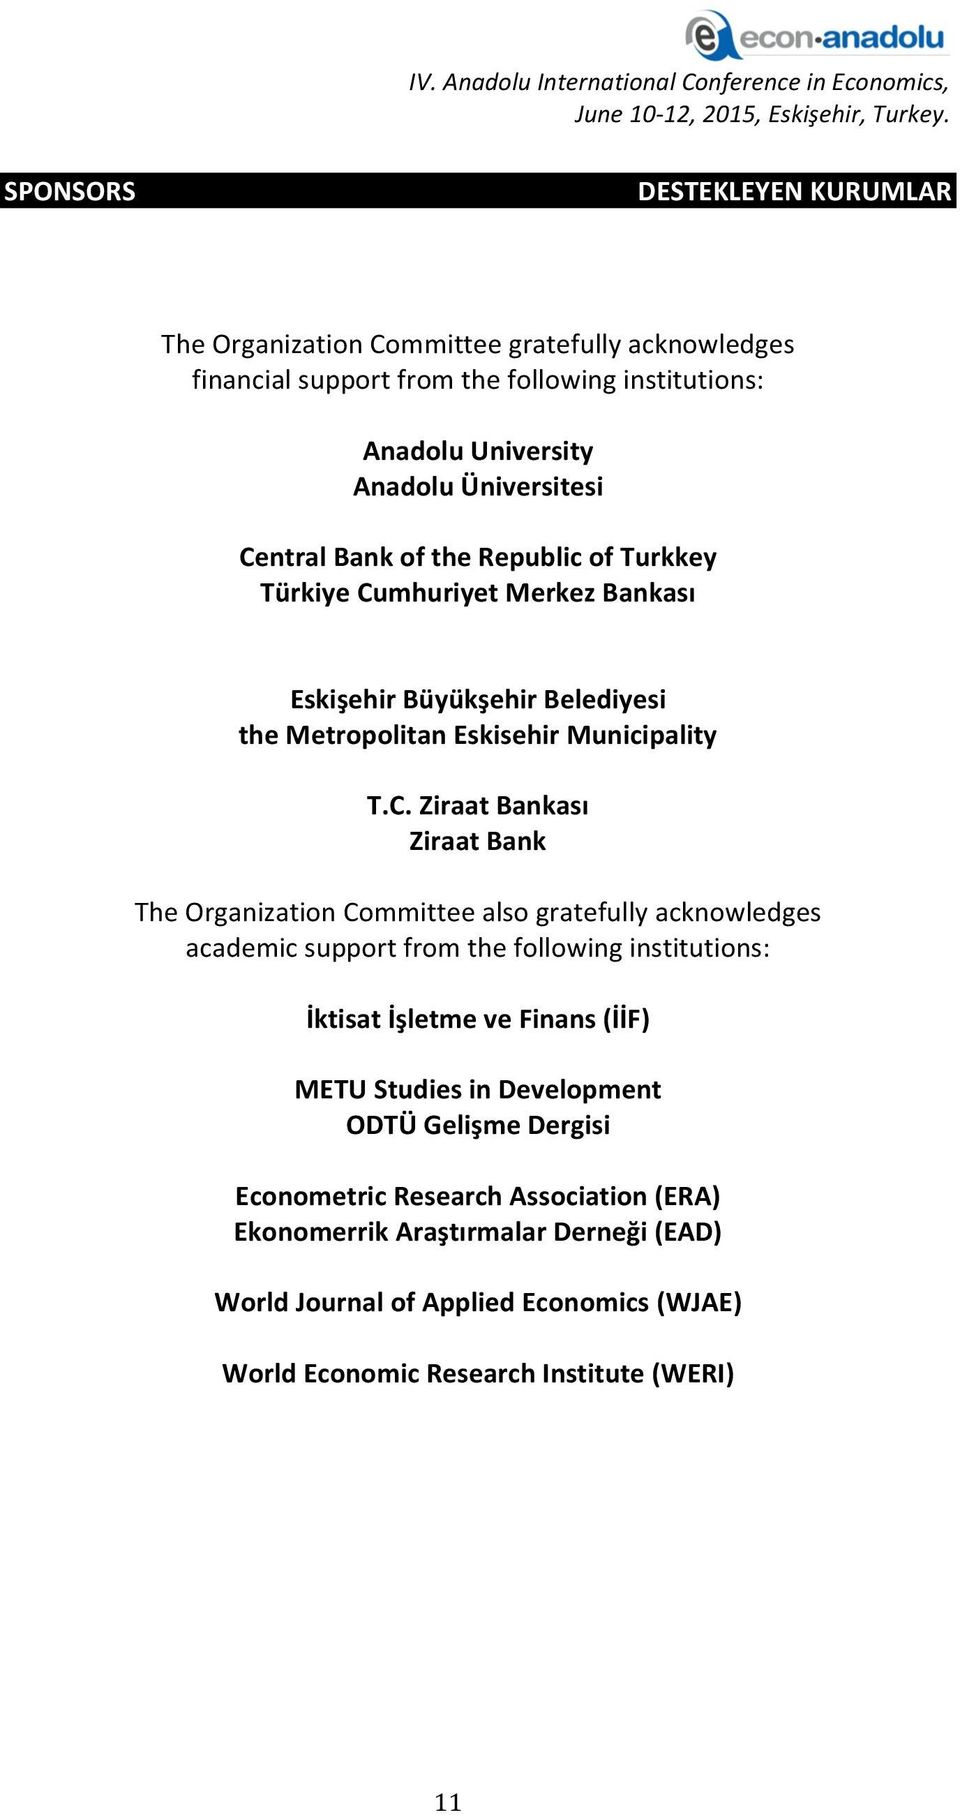 Bank The Organization Committee also gratefully acknowledges academic support from the following institutions: İktisat İşletme ve Finans (İİF) METU Studies in Development